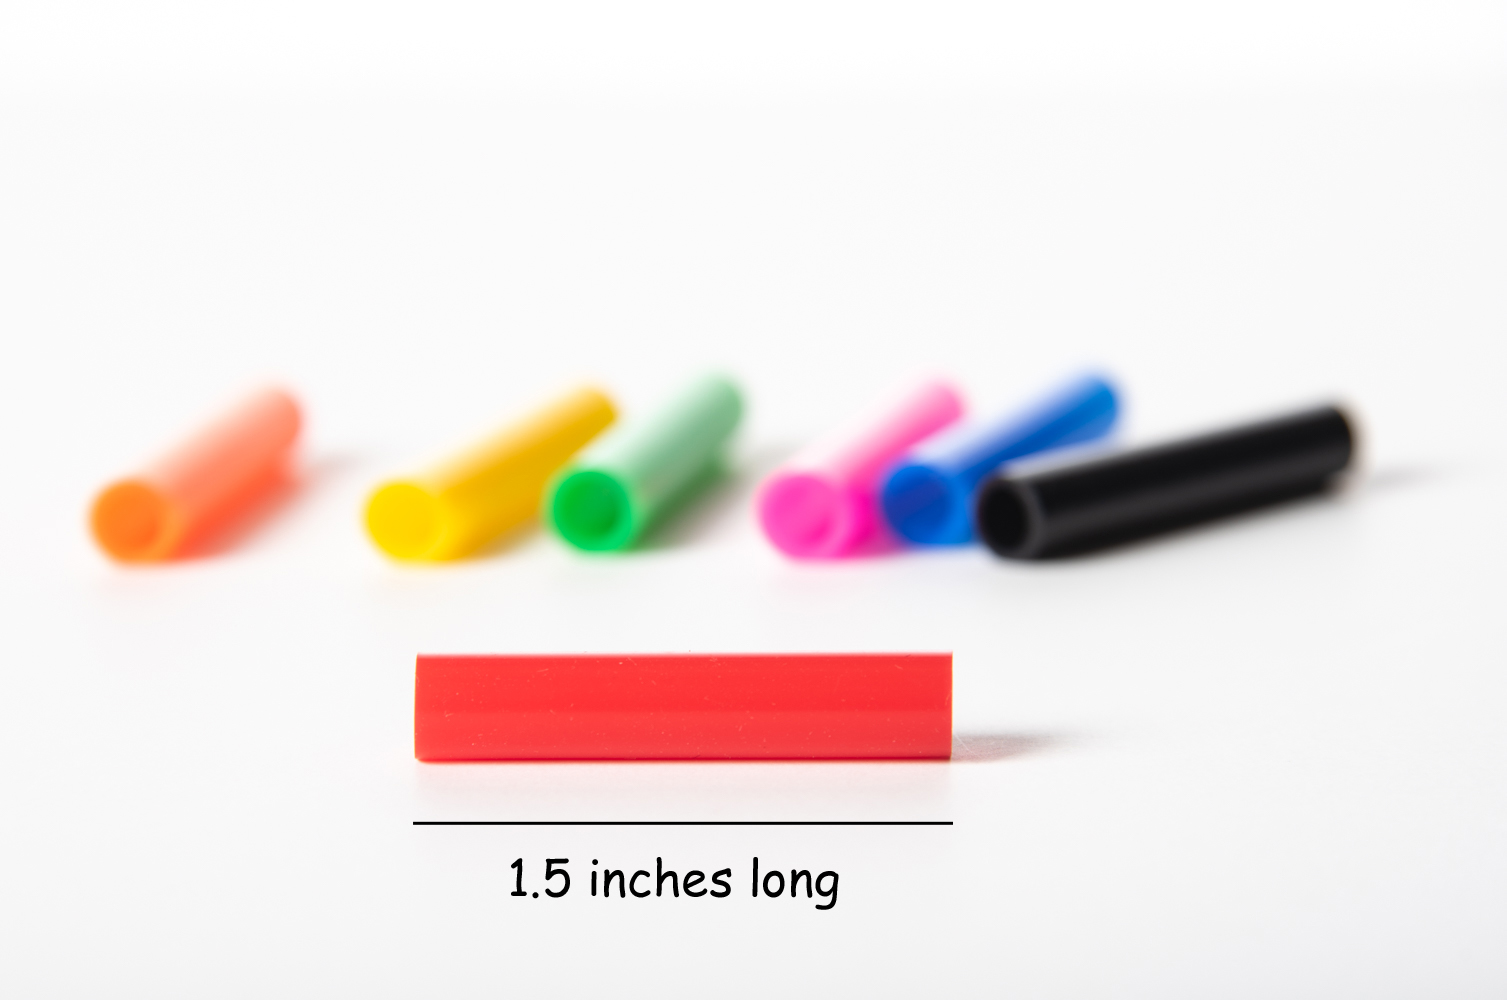 6mm flat silicone tips